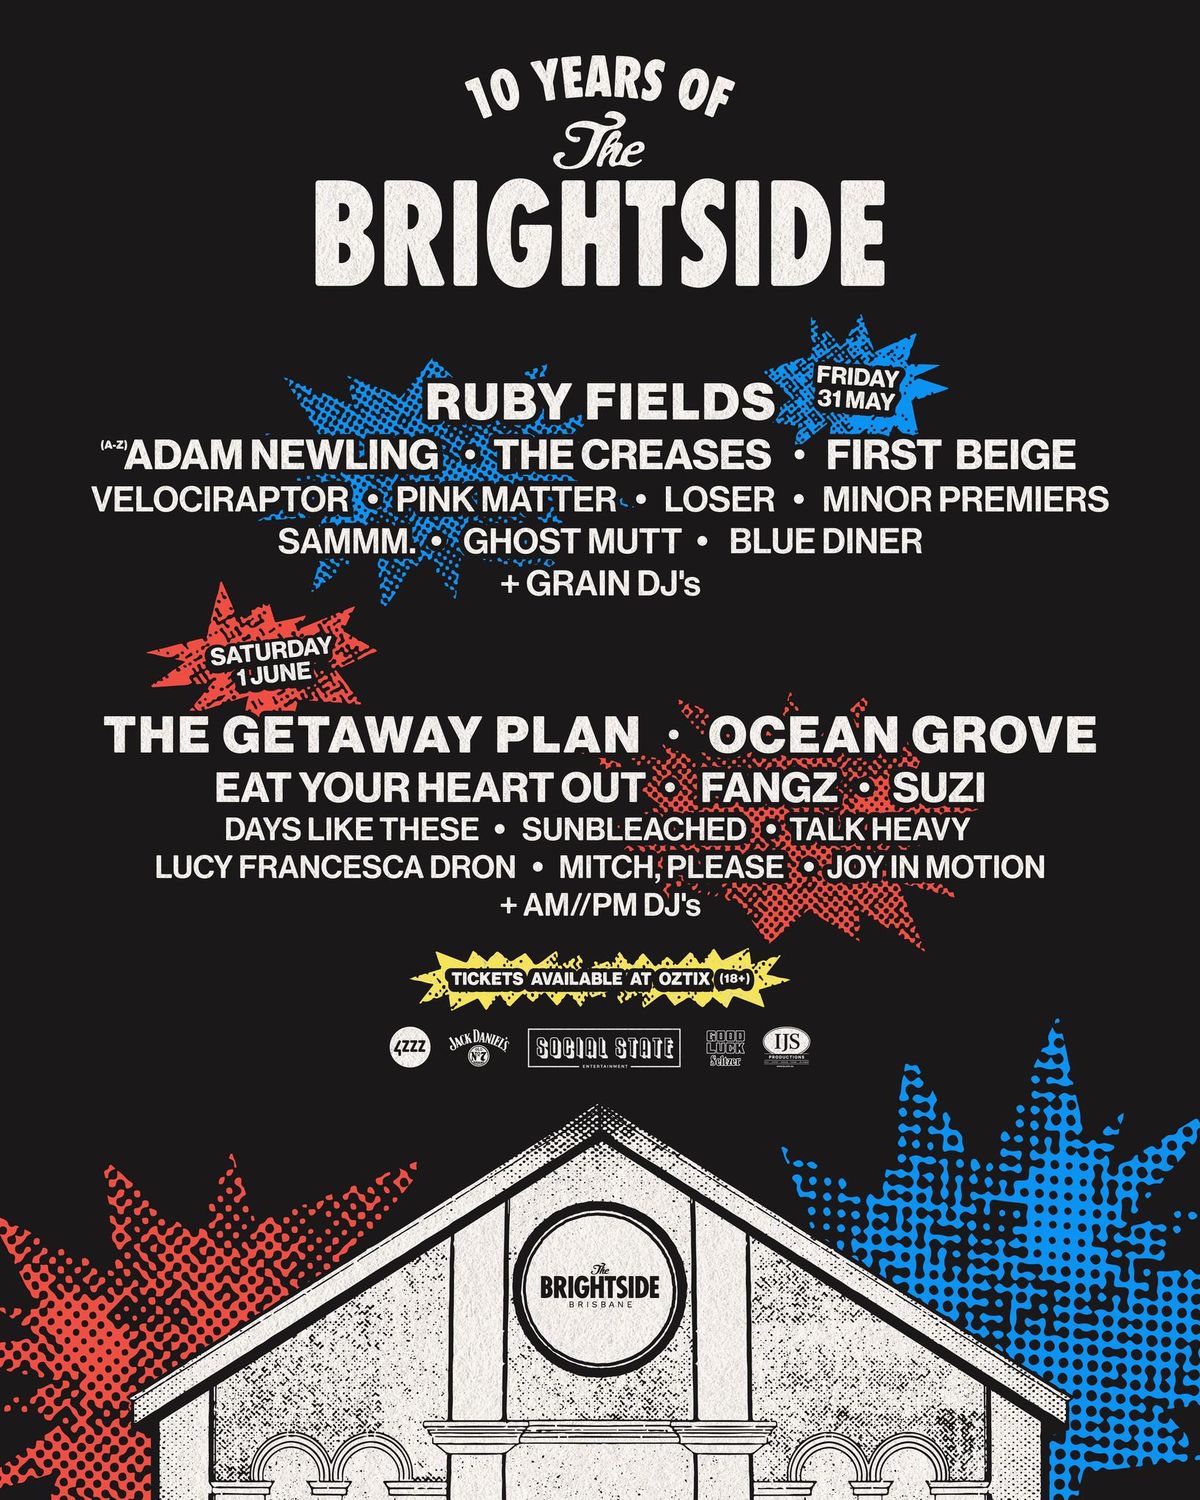 10 Years of The Brightside with Ruby Fields, The Getaway Plan, Ocean Grove and many more